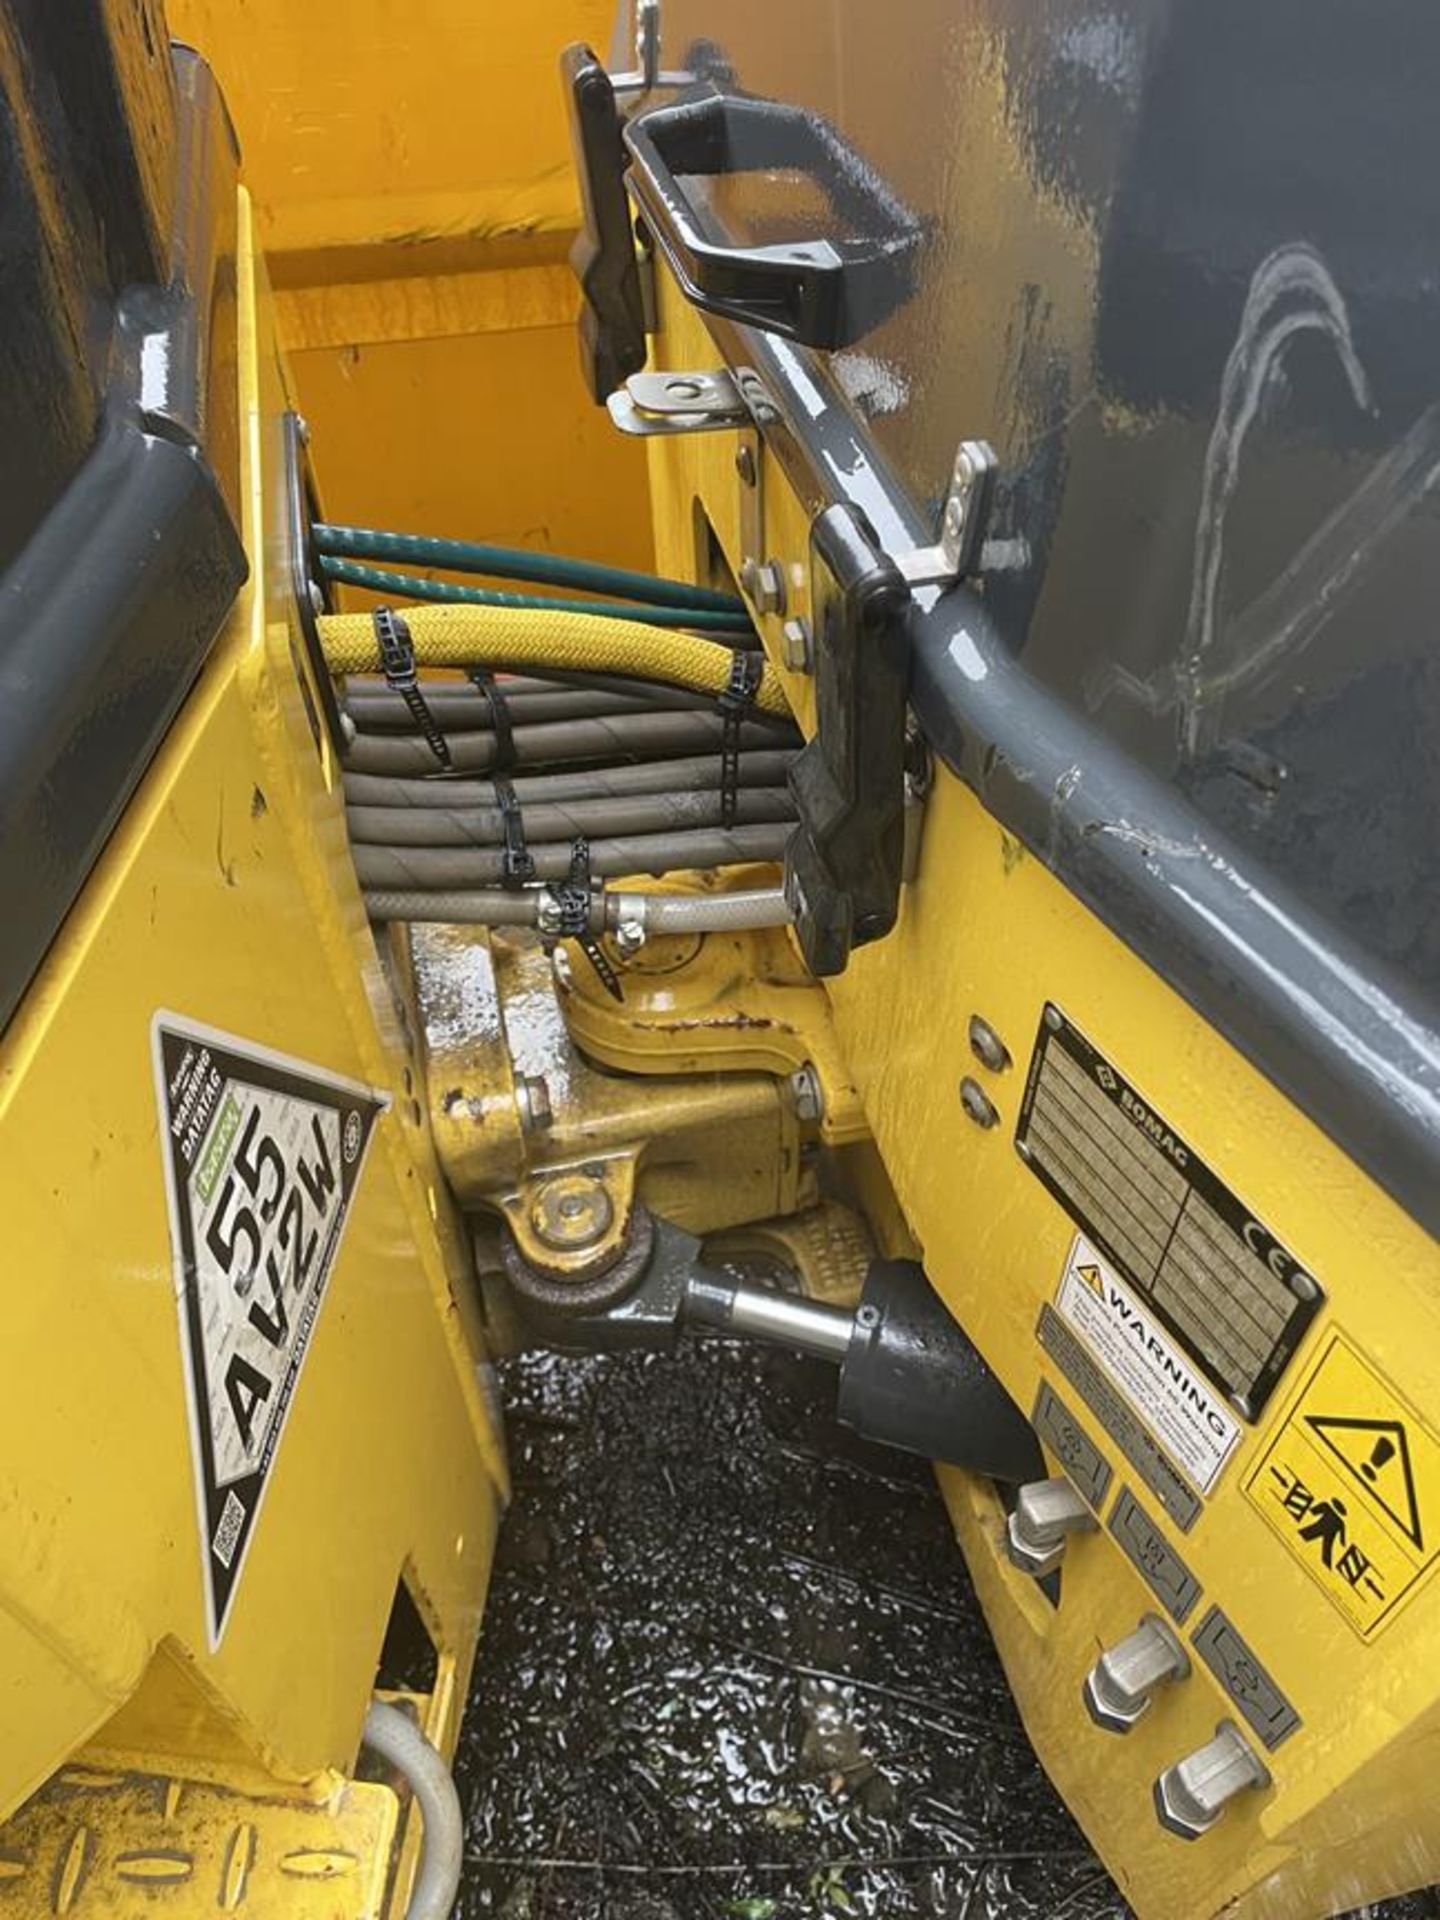 Bomag BW120 AD-5 Tandem Roller, 2700/3500kg Operating Mass S/No. 101880471203 (YOM: 2019) - Image 7 of 9